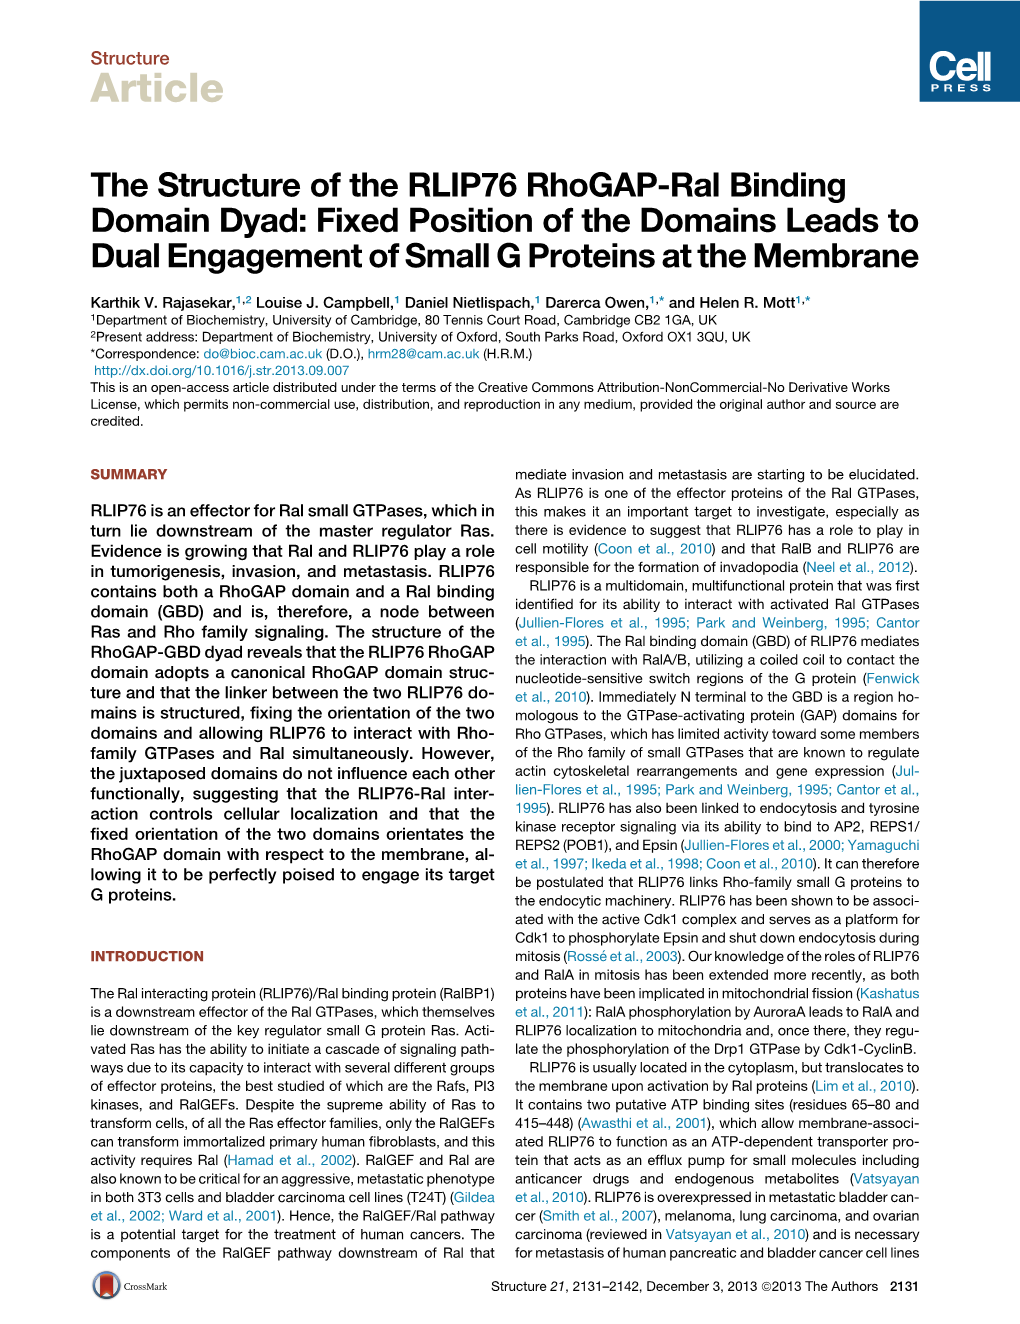 The Structure of the RLIP76 Rhogap-Ral Binding Domain Dyad: Fixed Position of the Domains Leads to Dual Engagement of Small G Proteins at the Membrane